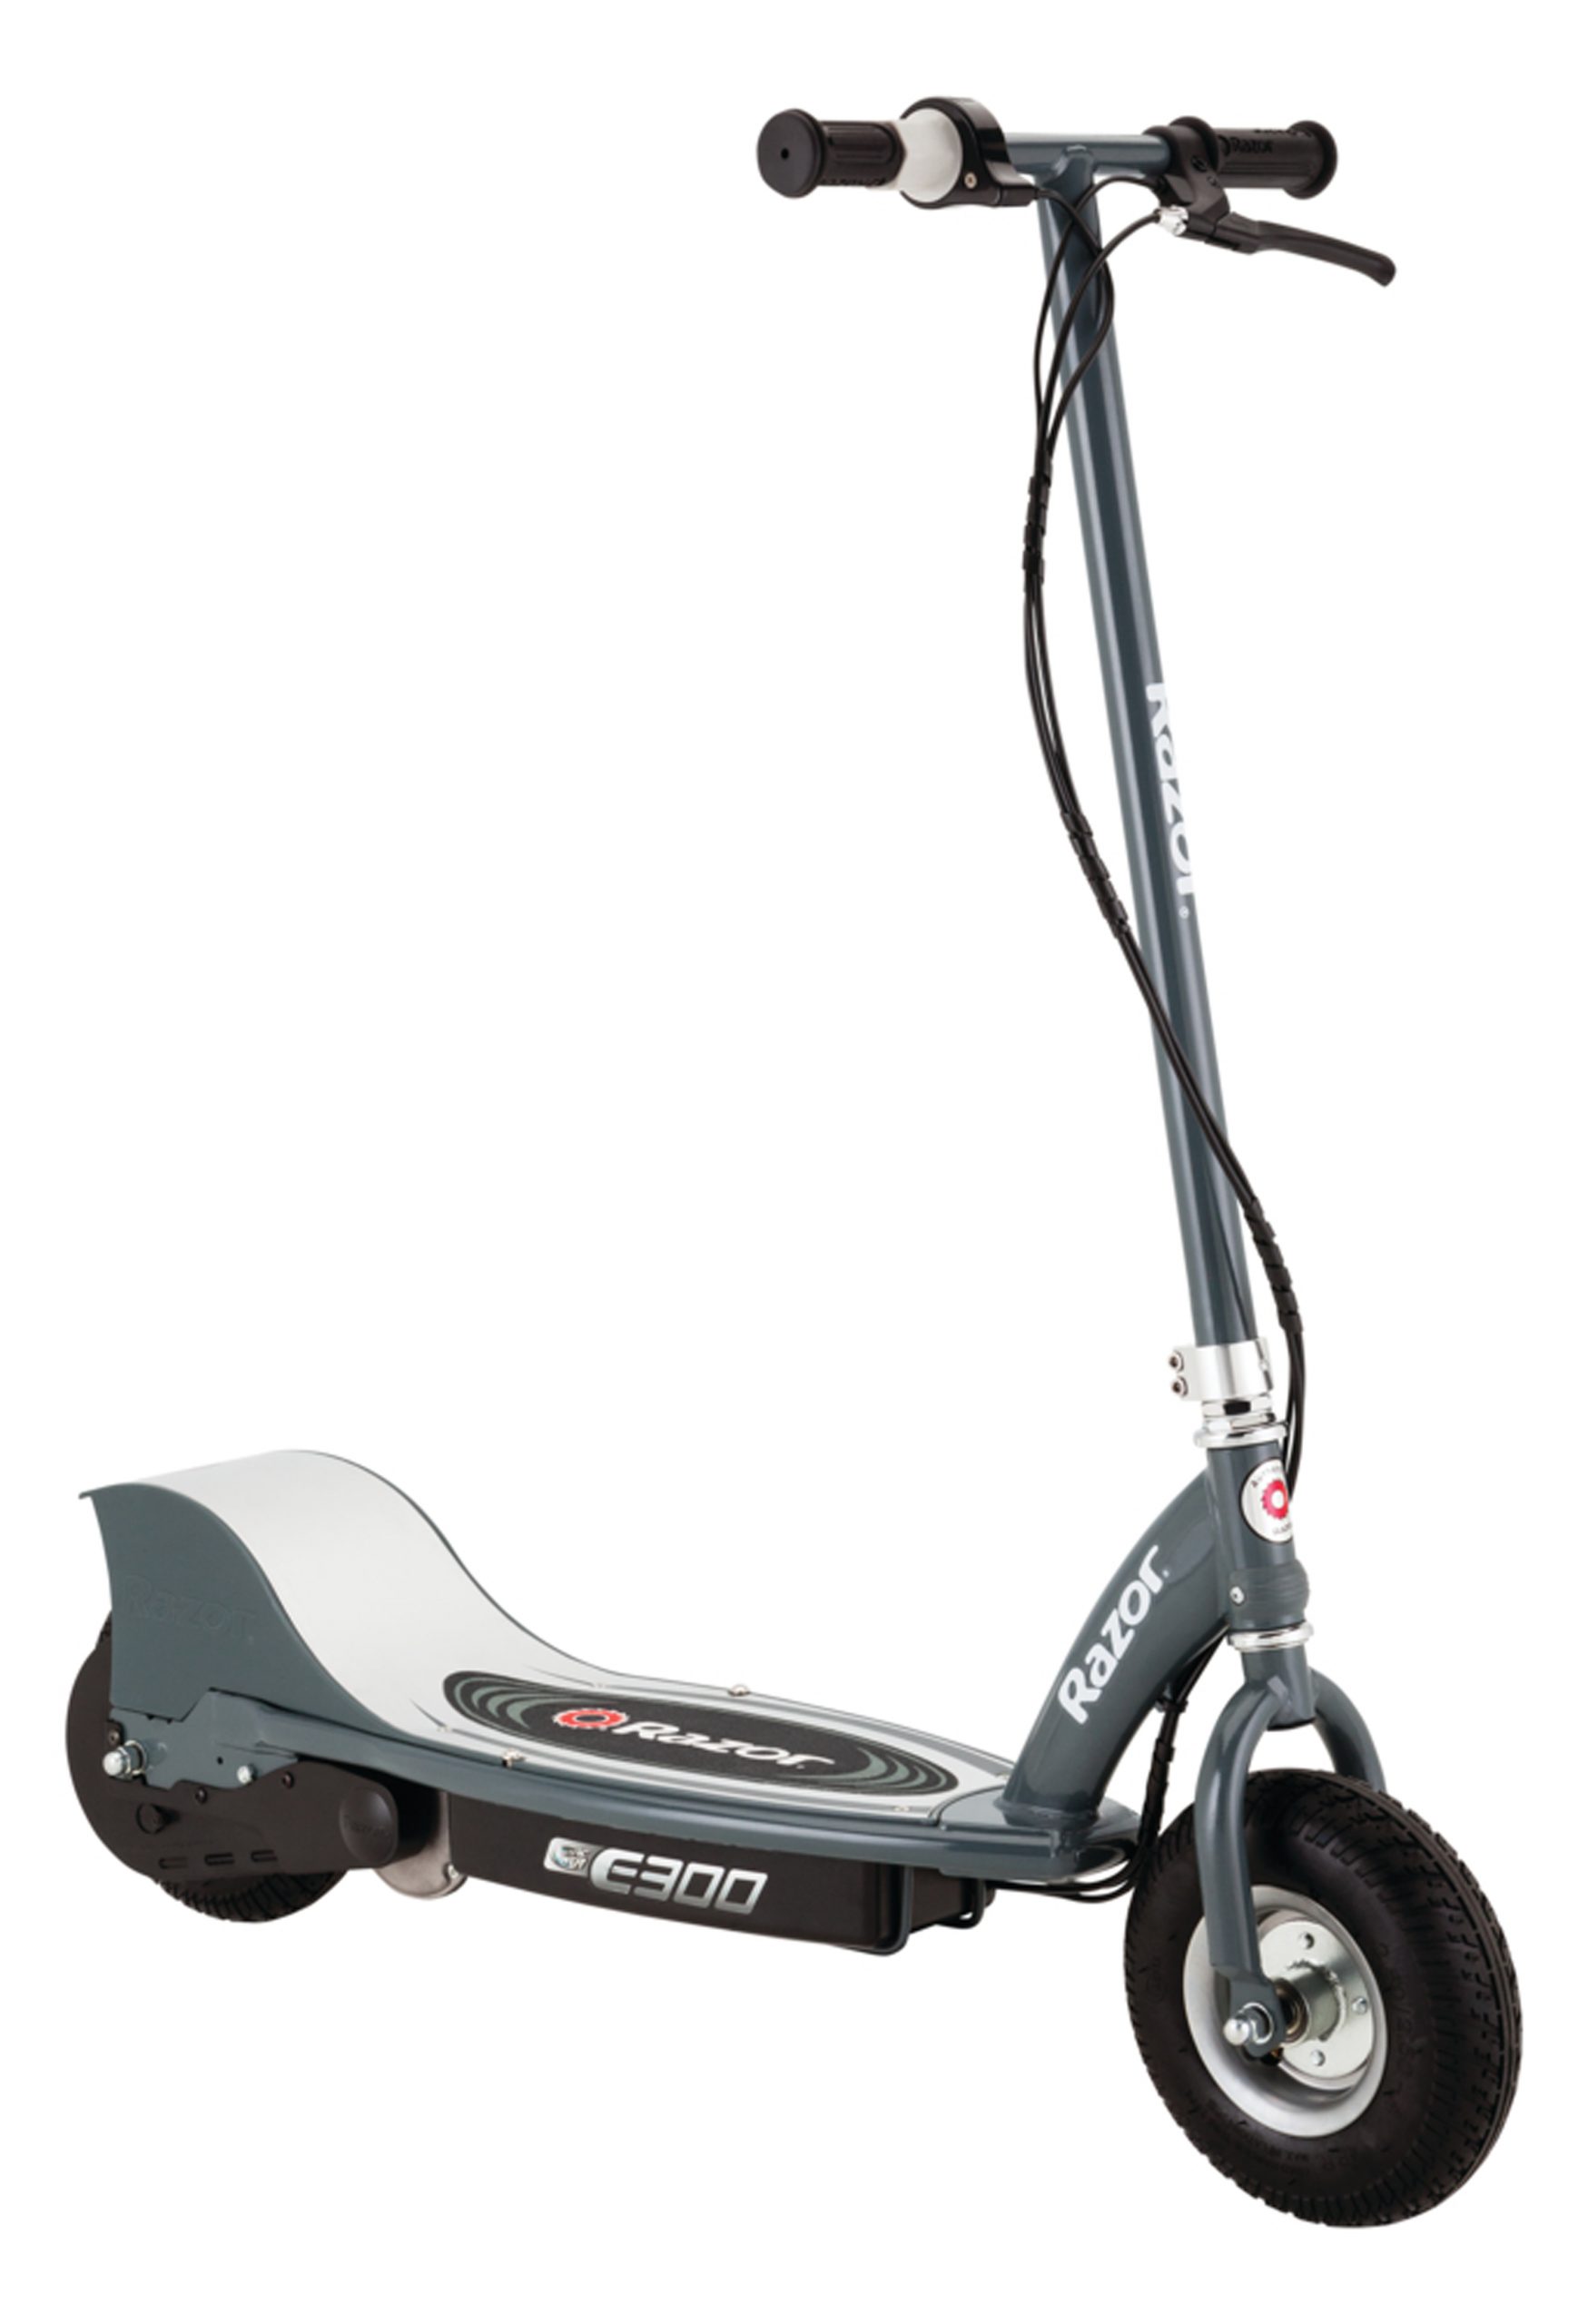 E300 Electric Scooter – GY